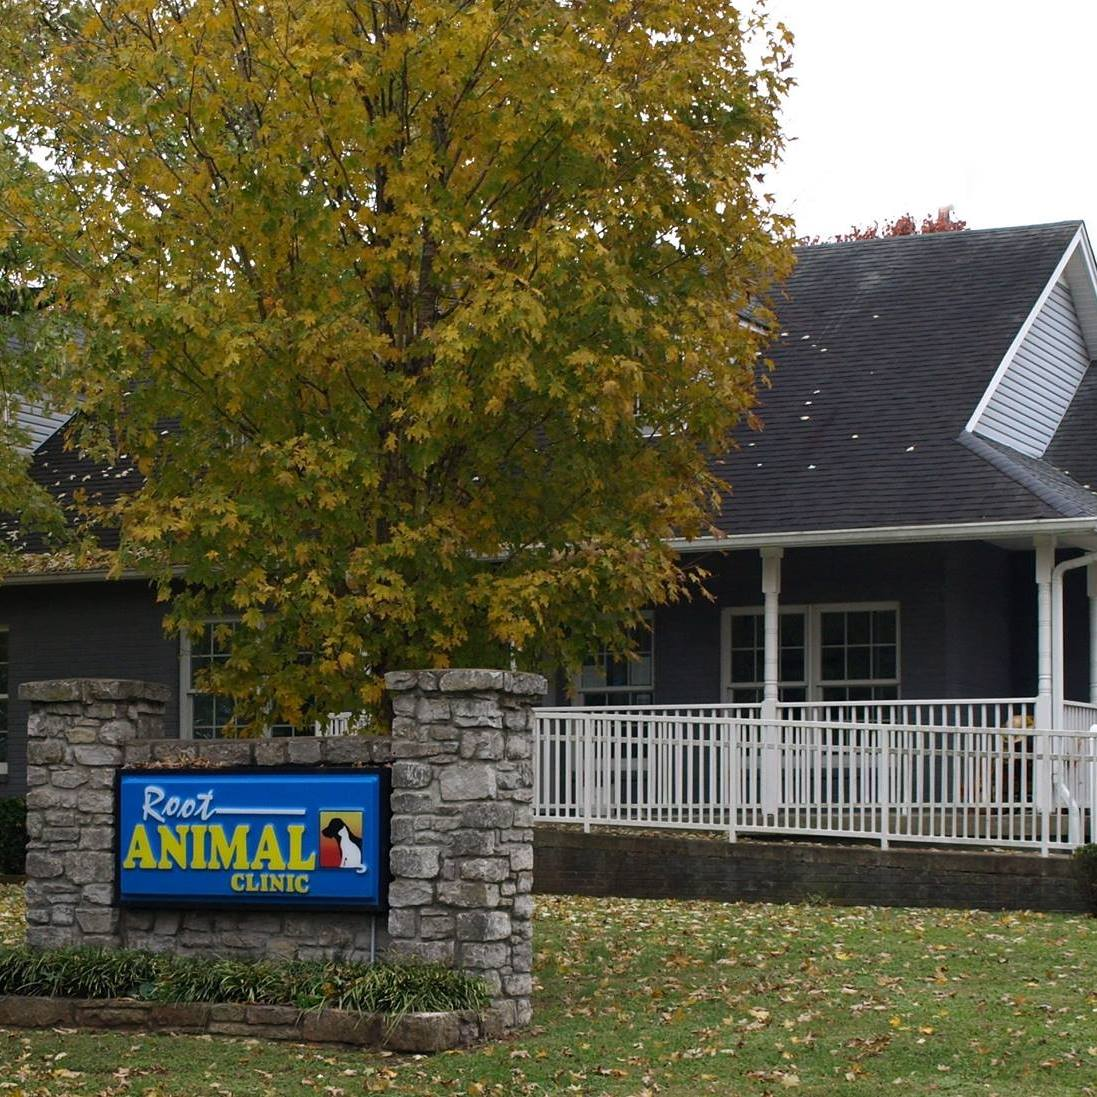 Root Animal Clinic